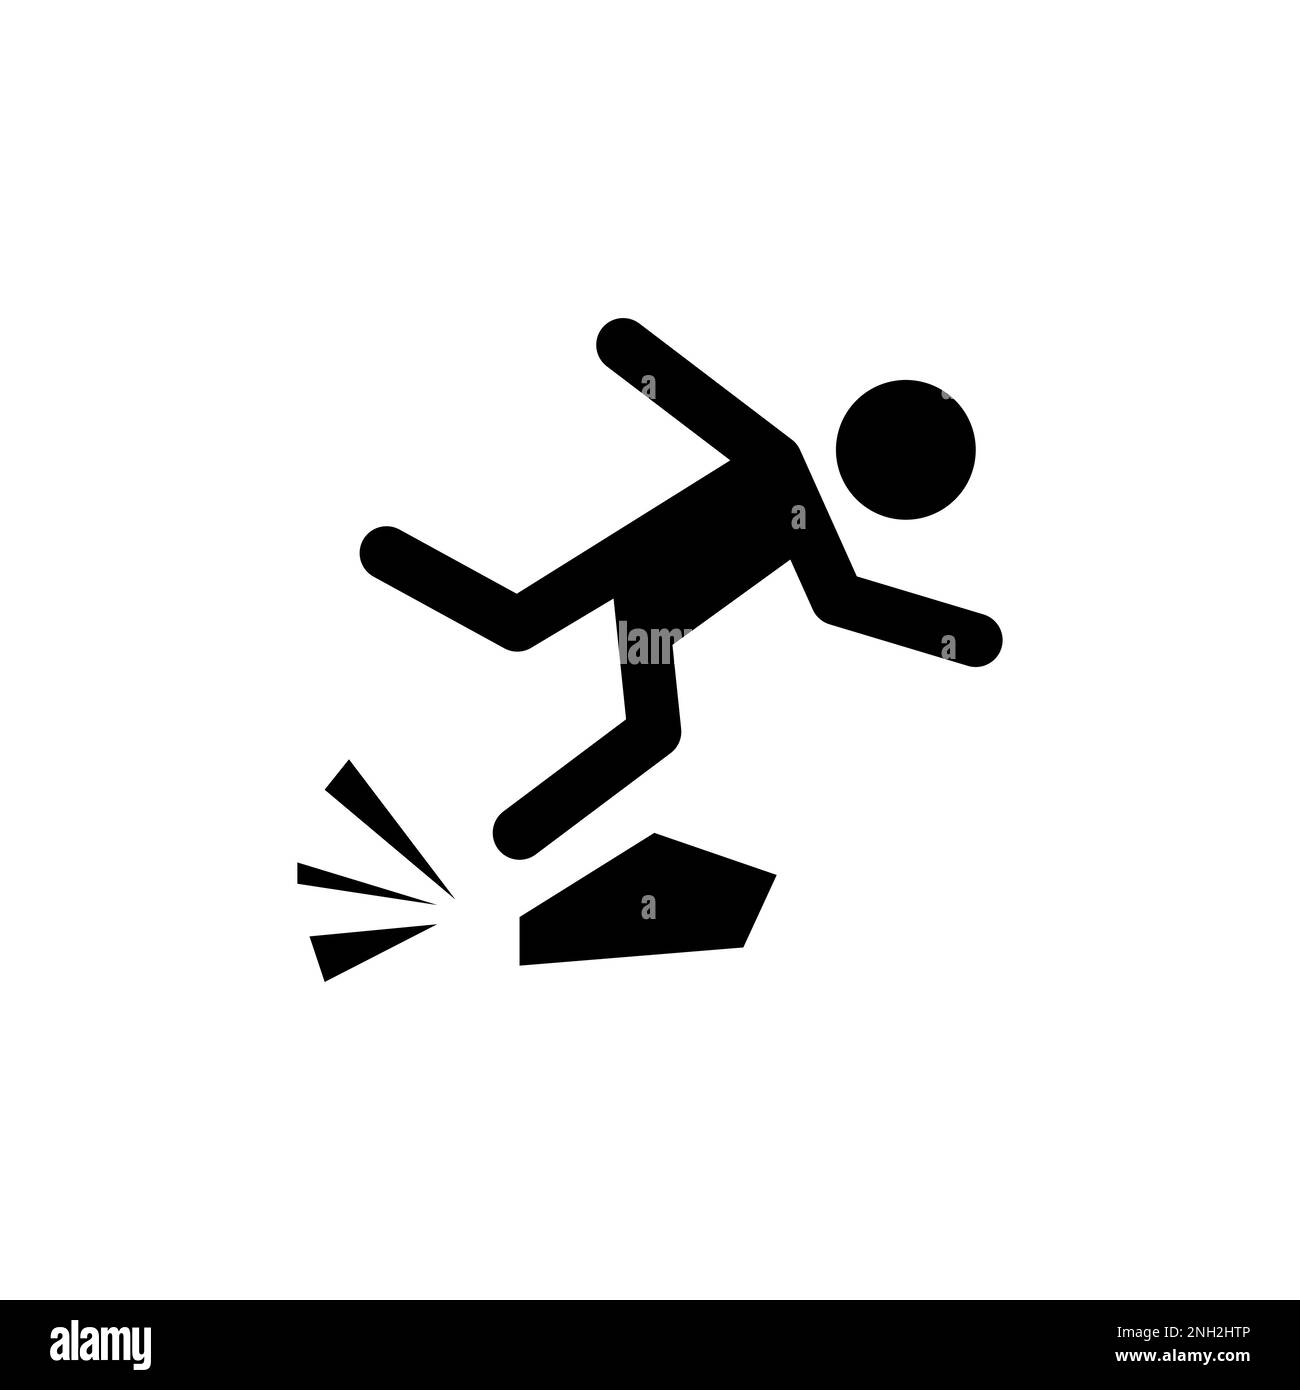 Stumbling man icon isolated on white background. A warning sign about the danger. Tripping hazard. Watch your step symbol. Vector illustration Stock Vector